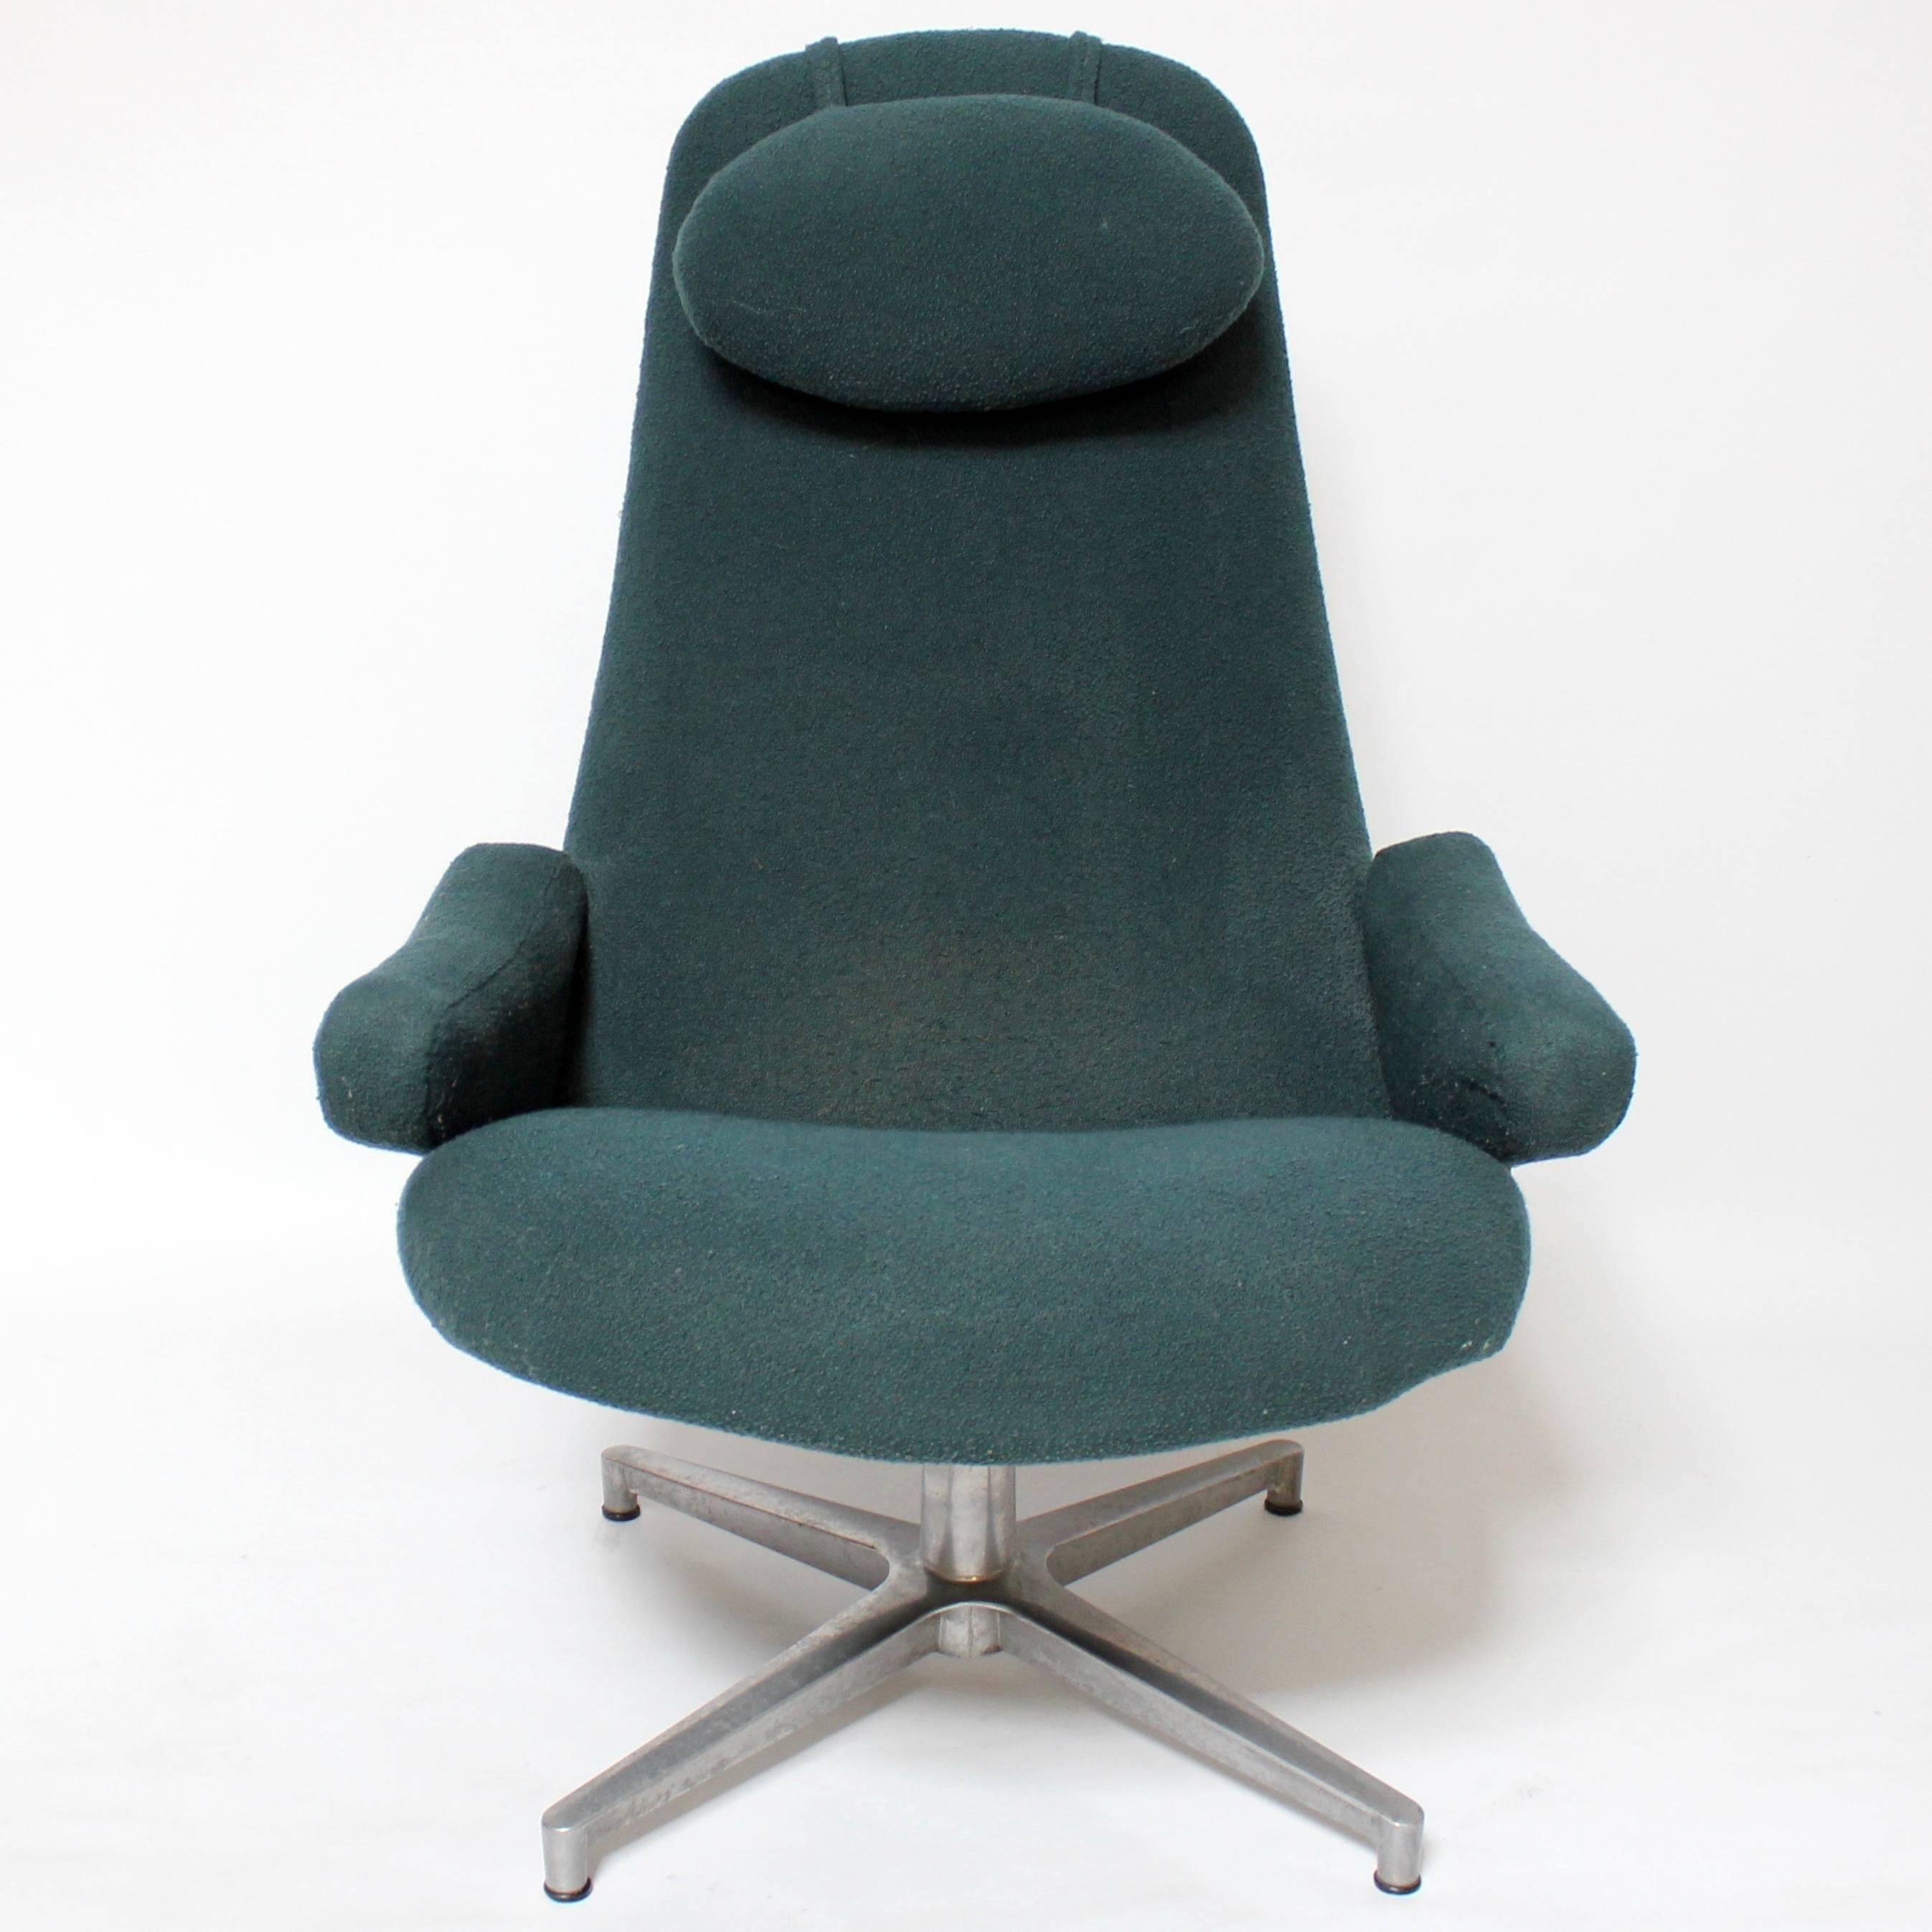 1960s Contourette upholstered lounge chair designed by Alf Svensson for DUX. The chair swivels, and features floating armrests, a detachable headrest, and a four-pointed aluminium base.